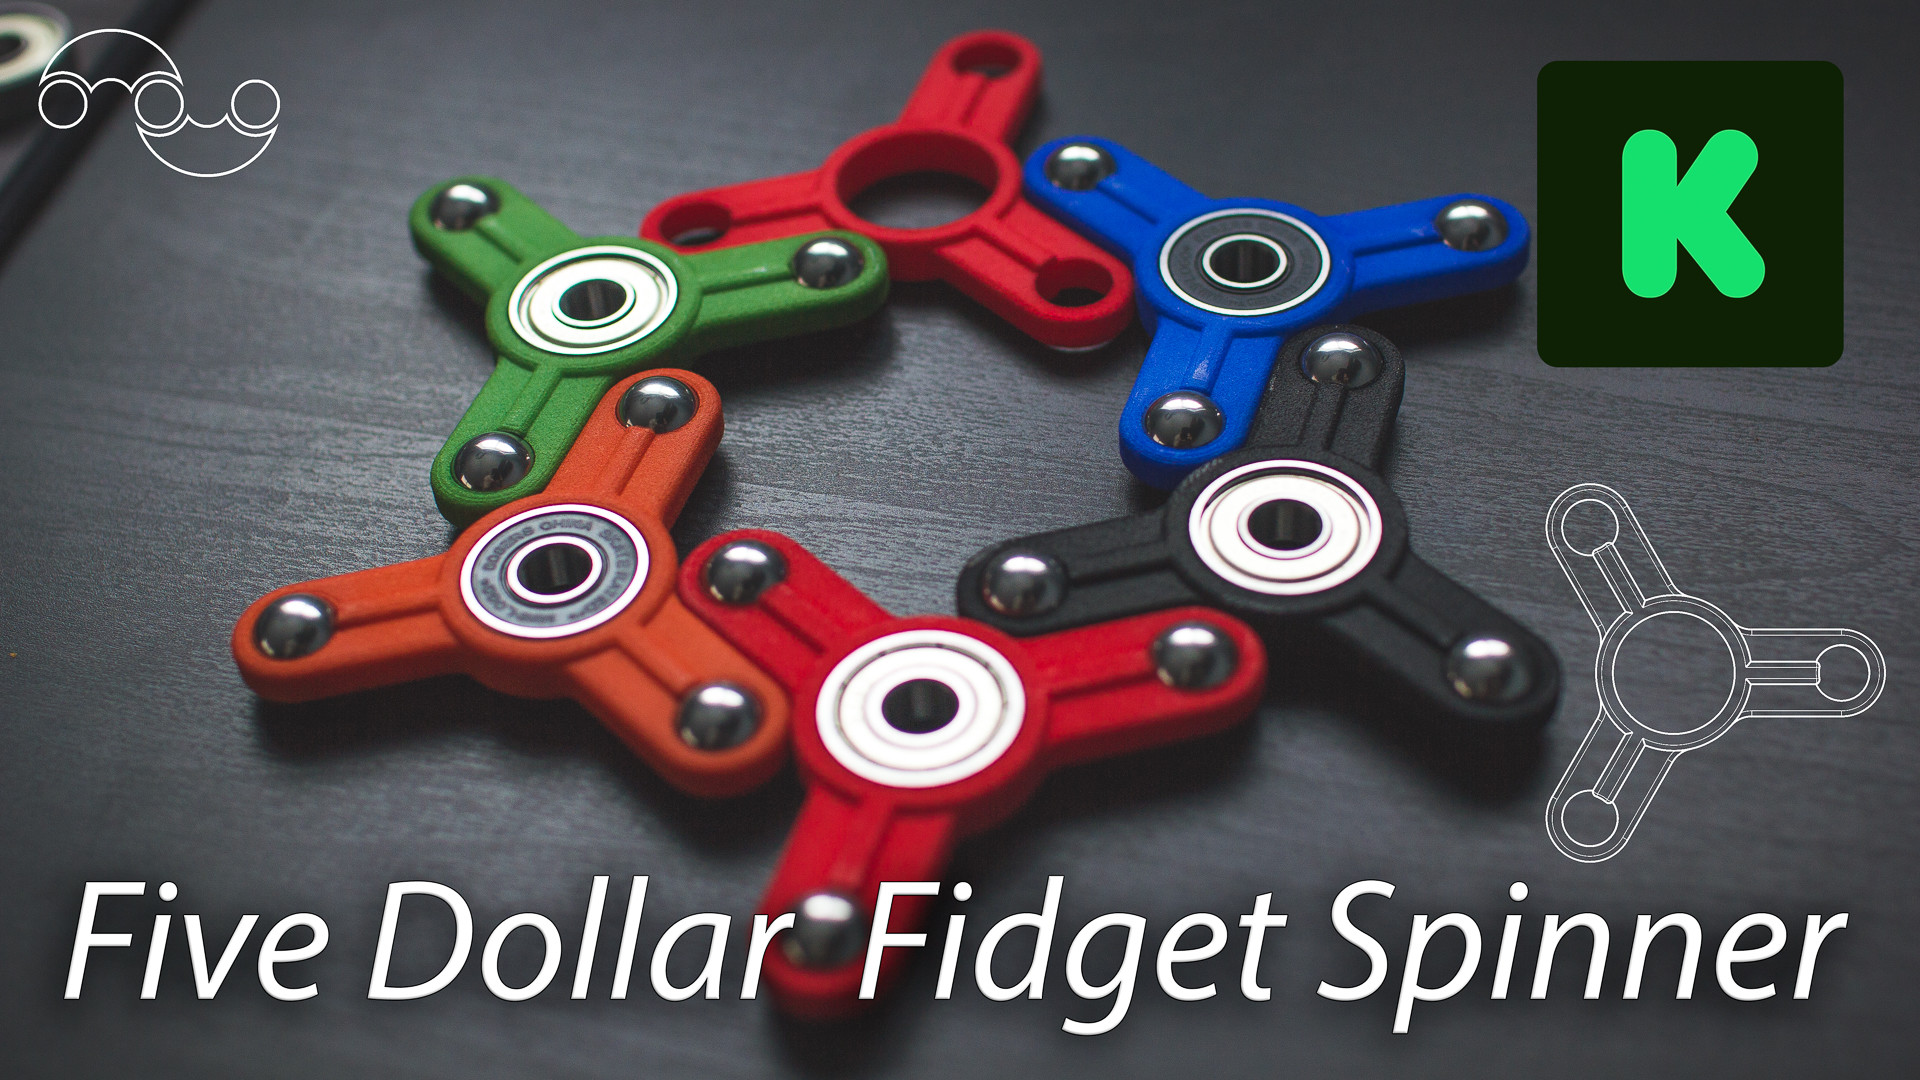 Gold - Fidget Spinners Sold Here , HD Wallpaper & Backgrounds